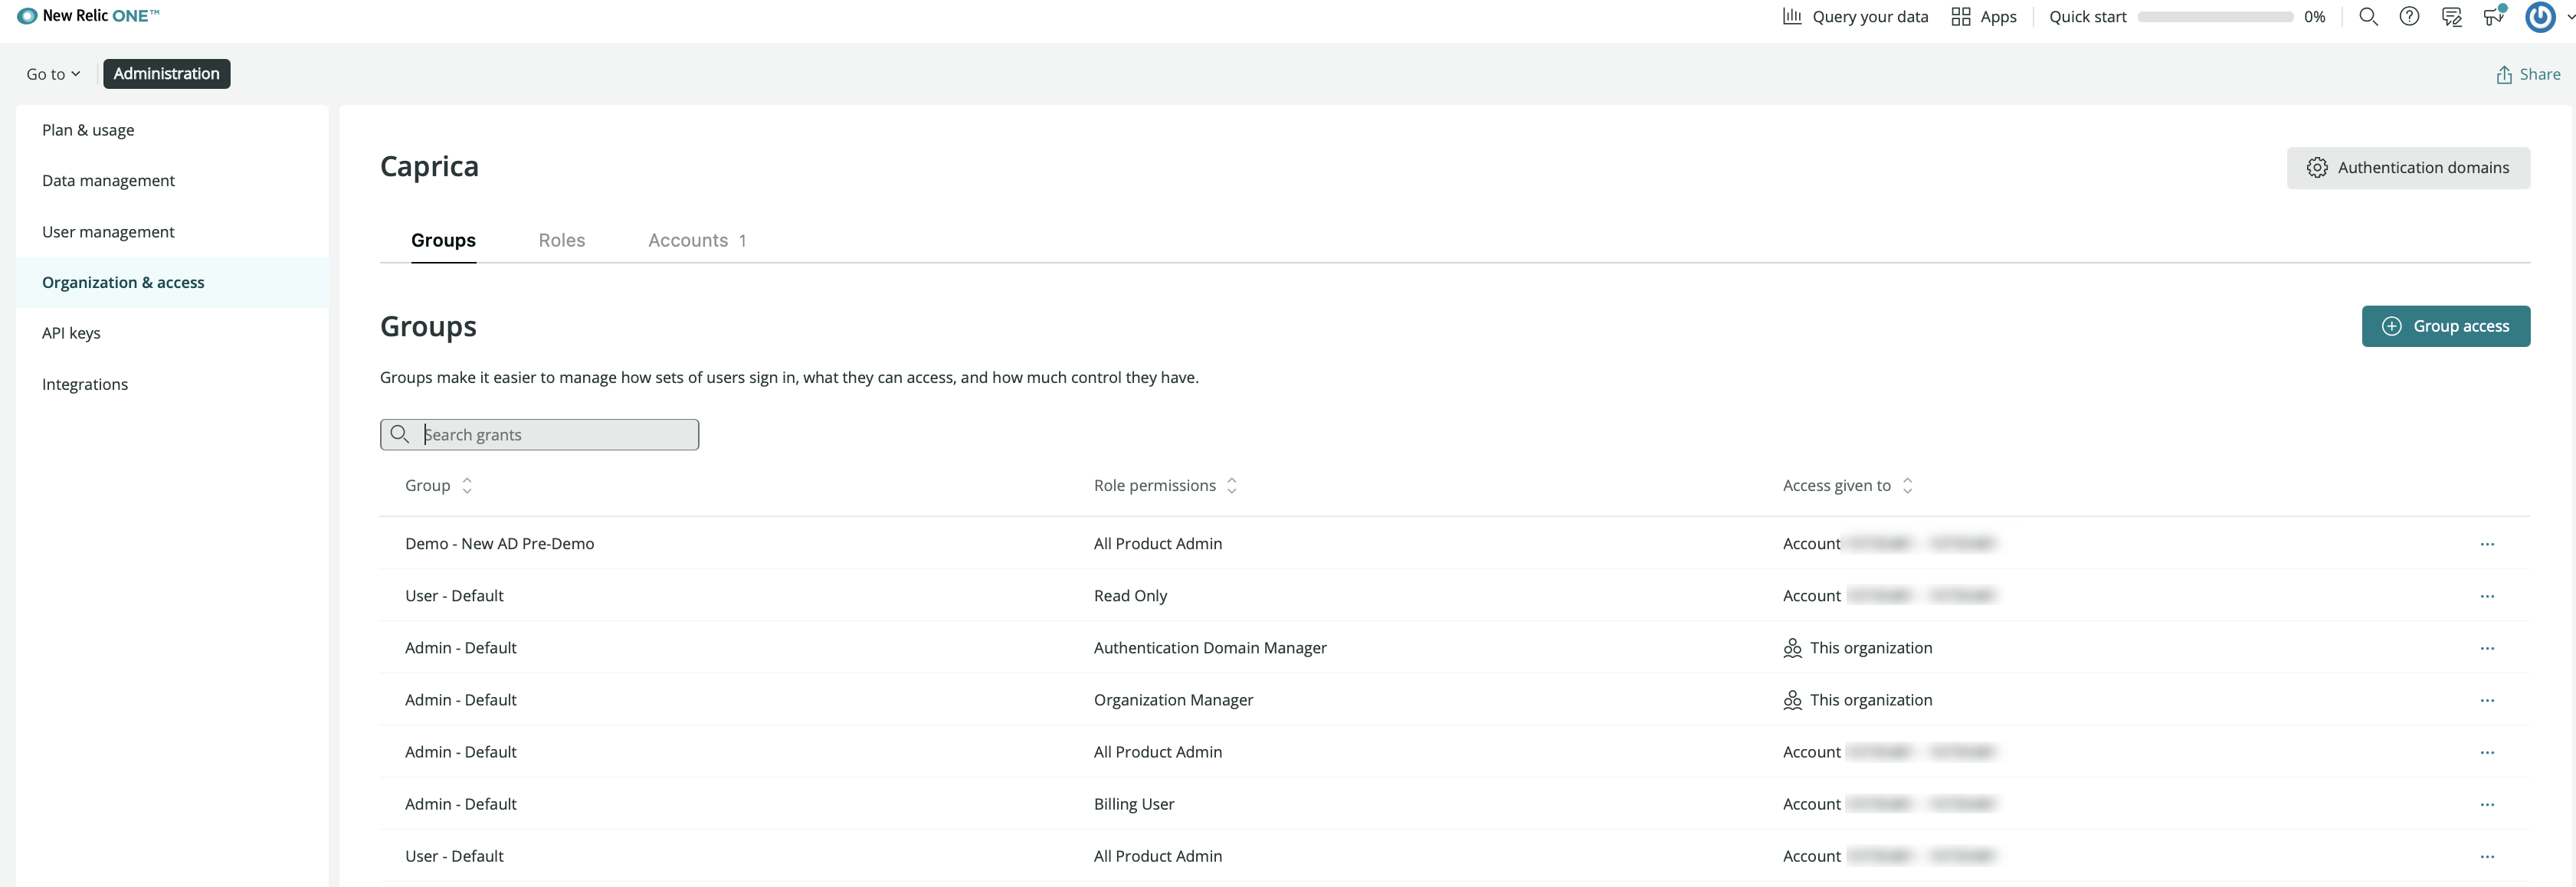 New Relic organization and access UI